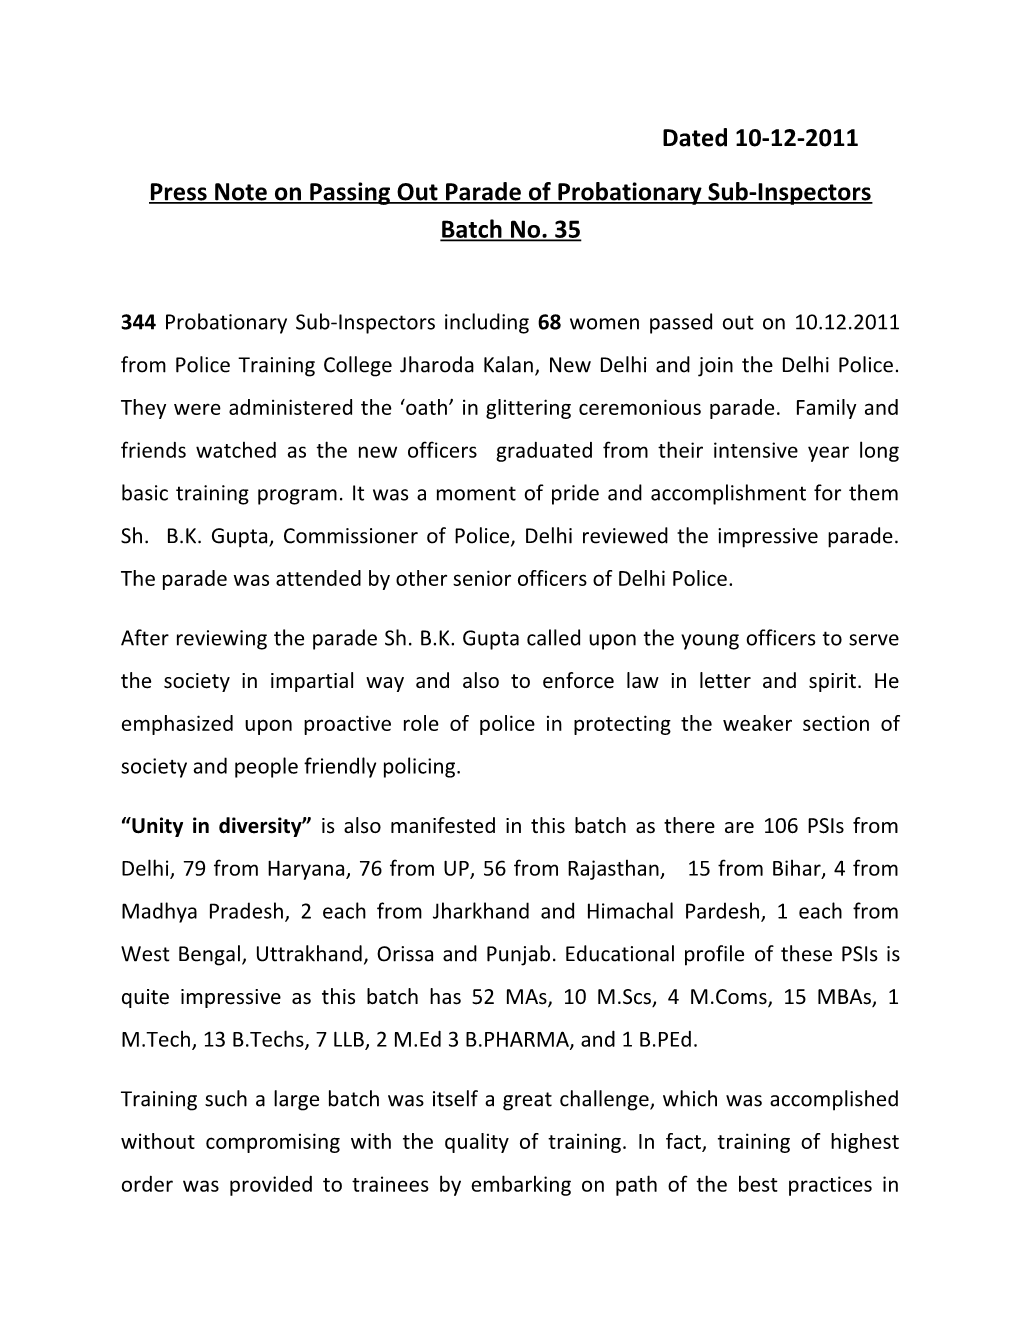 Press Note on Passing out Parade of Probationary Sub-Inspectors Batch No. 35